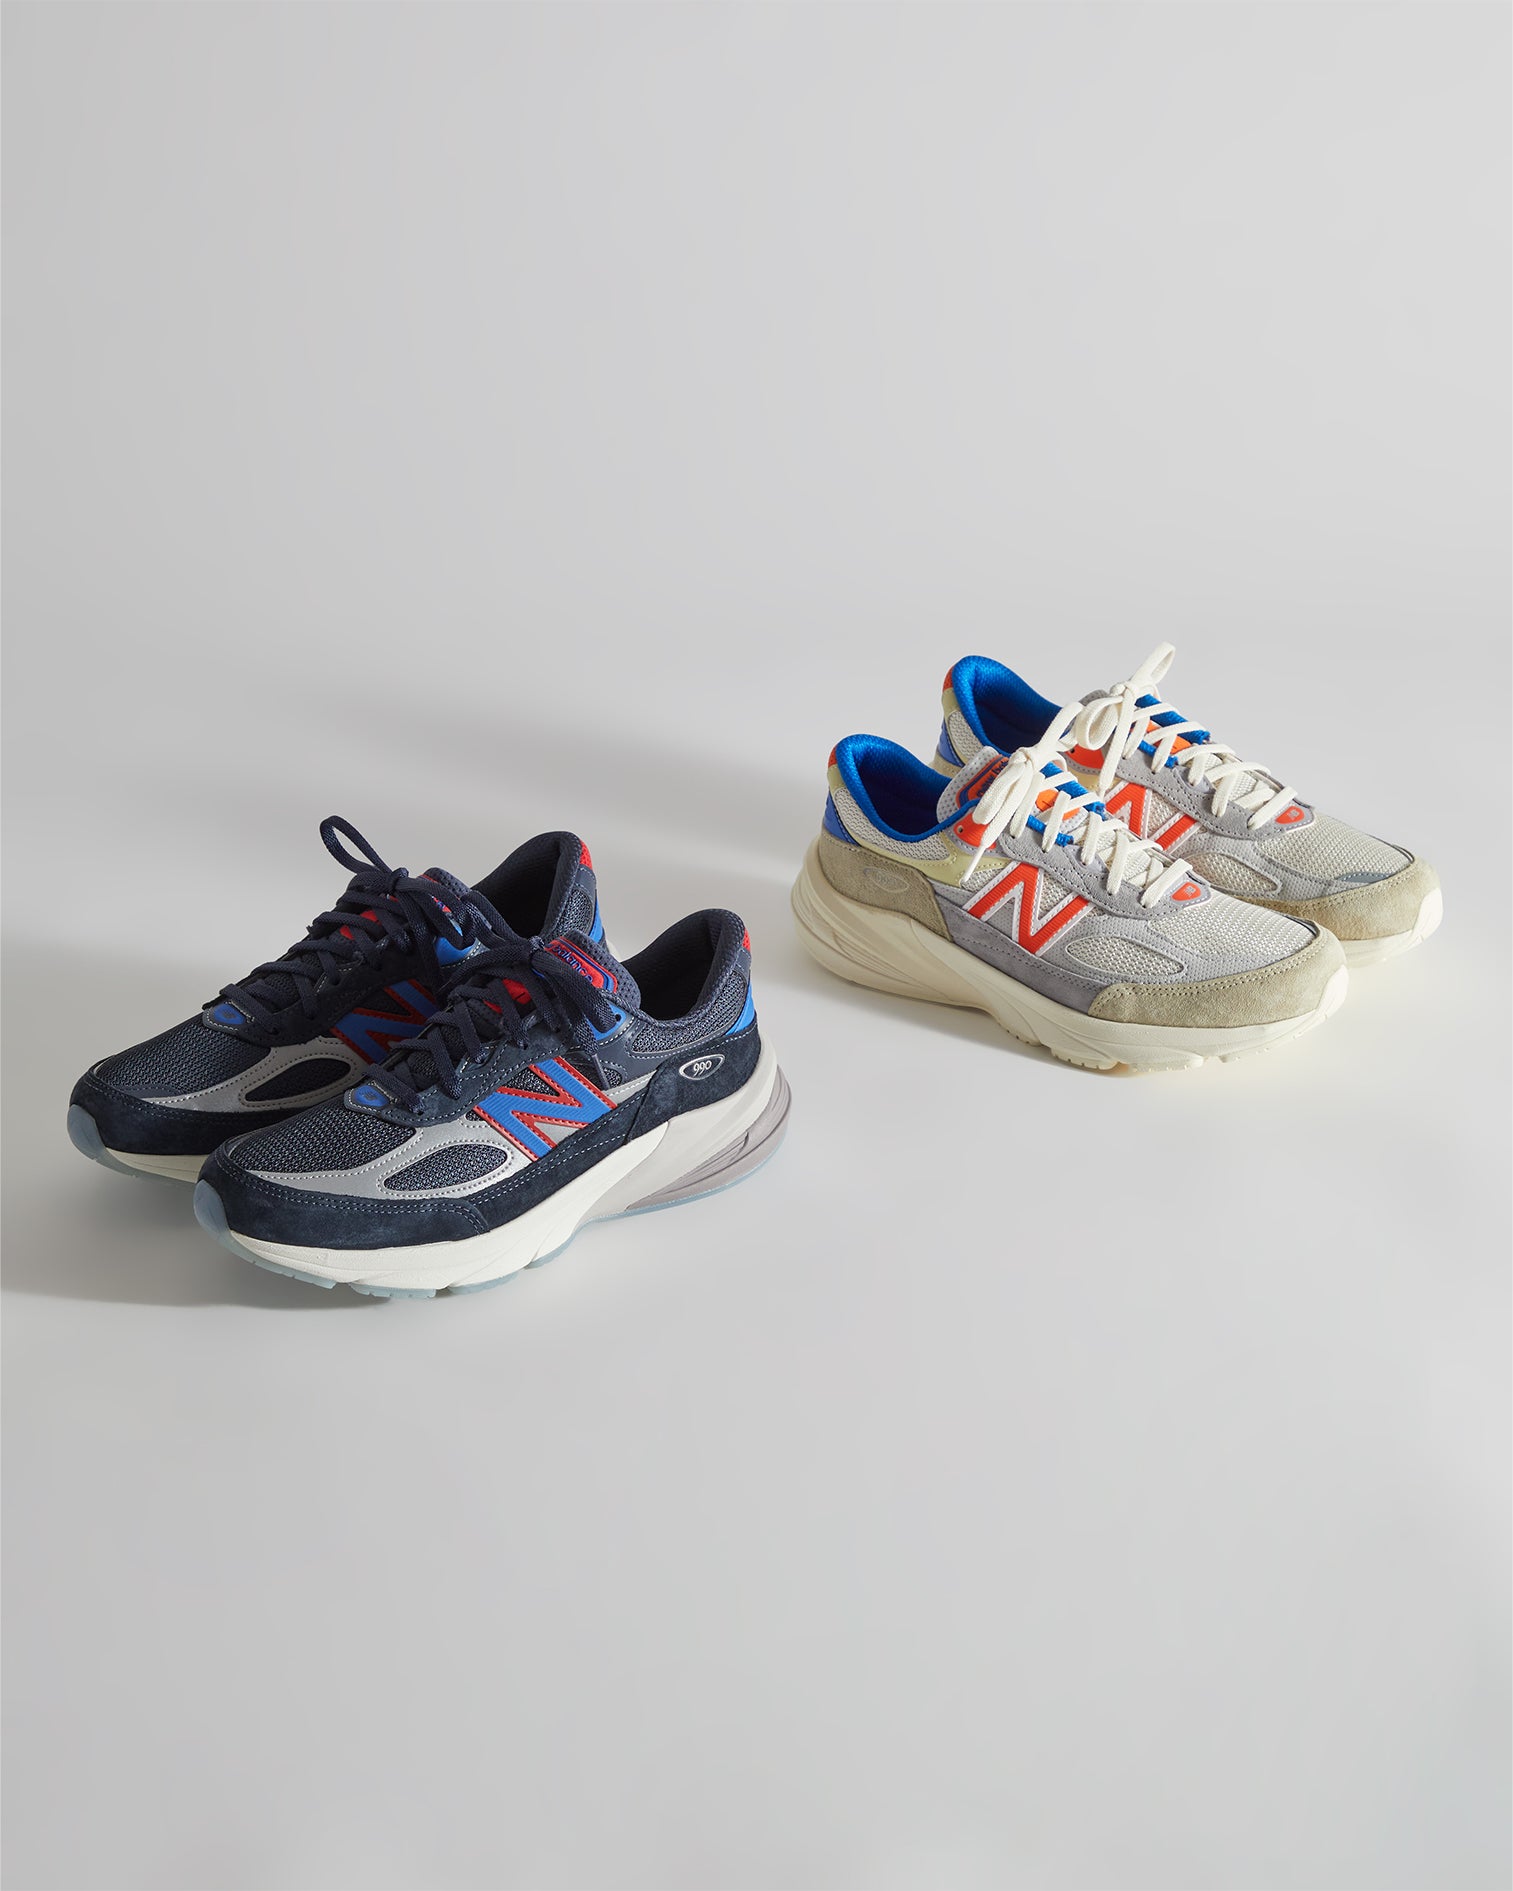 now presents a 1 1 custom with the New Balance 997 Craftsmanship